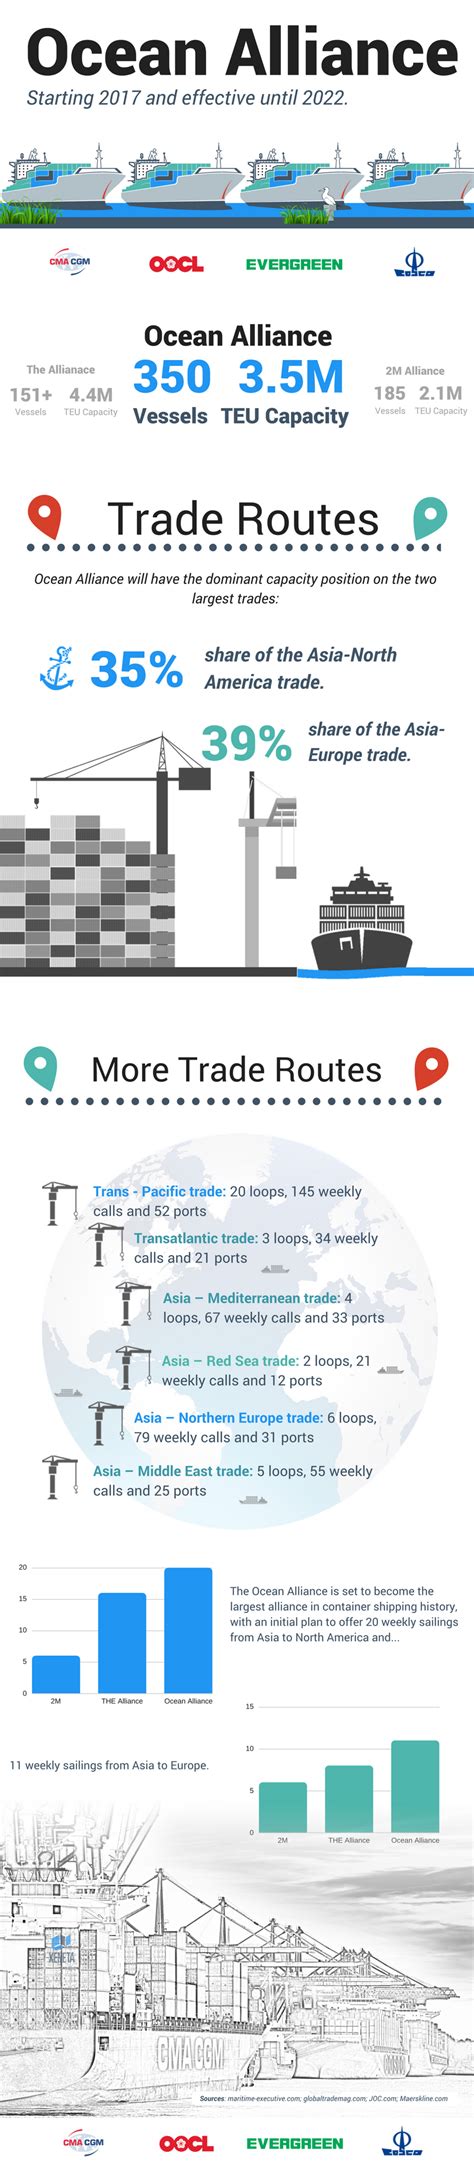 Infographic Key Info About The Ocean Alliance